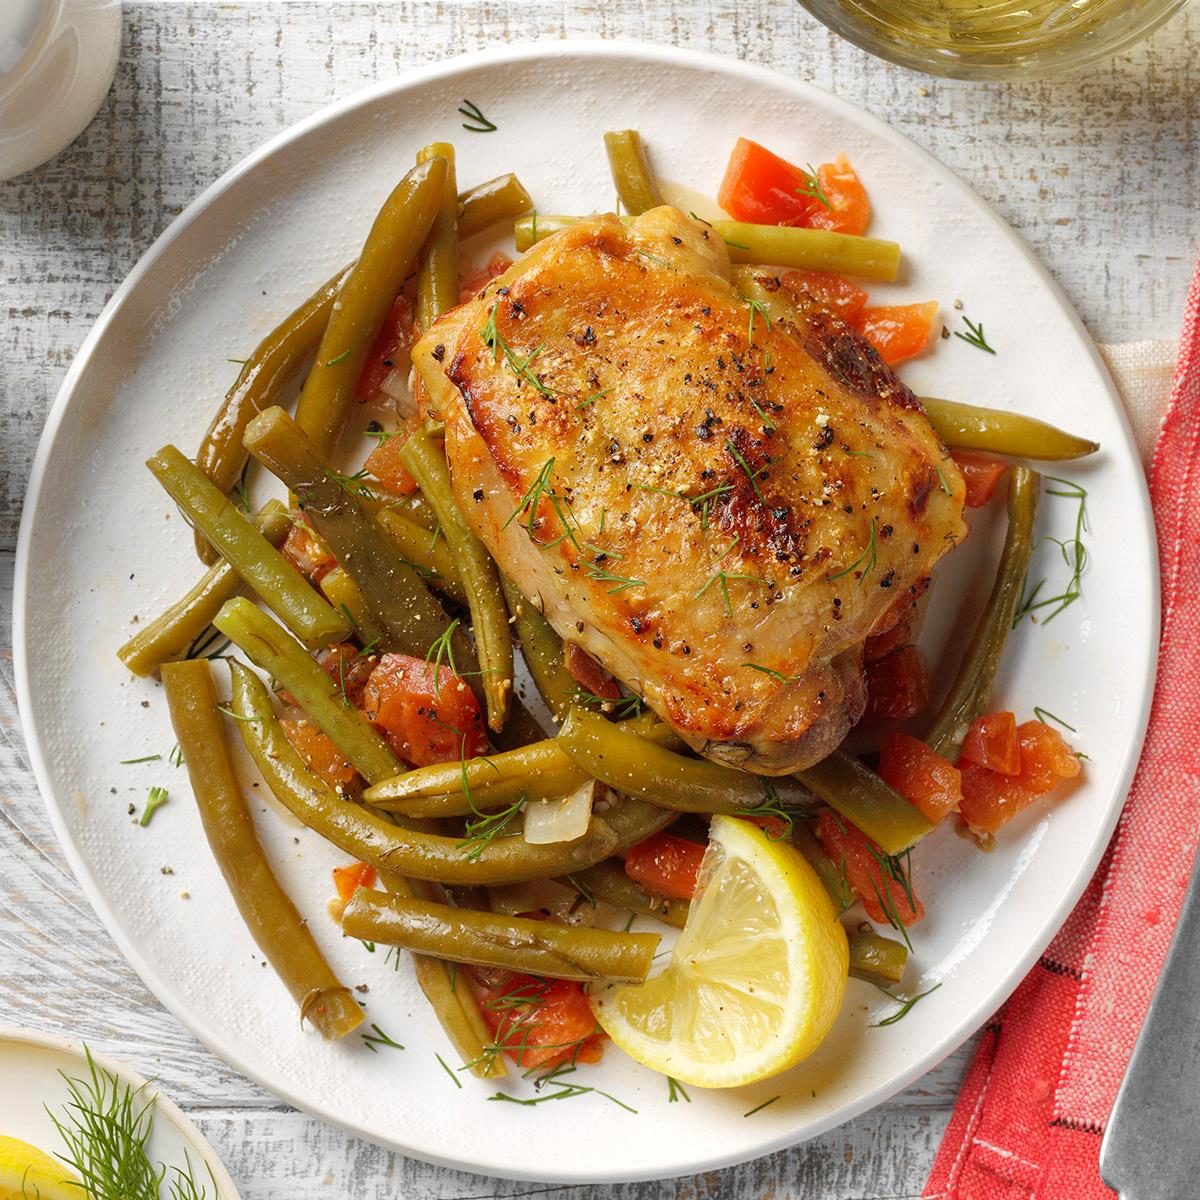 Greek Style Chicken With Green Beans Exps Thedscodr20 198490 B02 11 3b 17